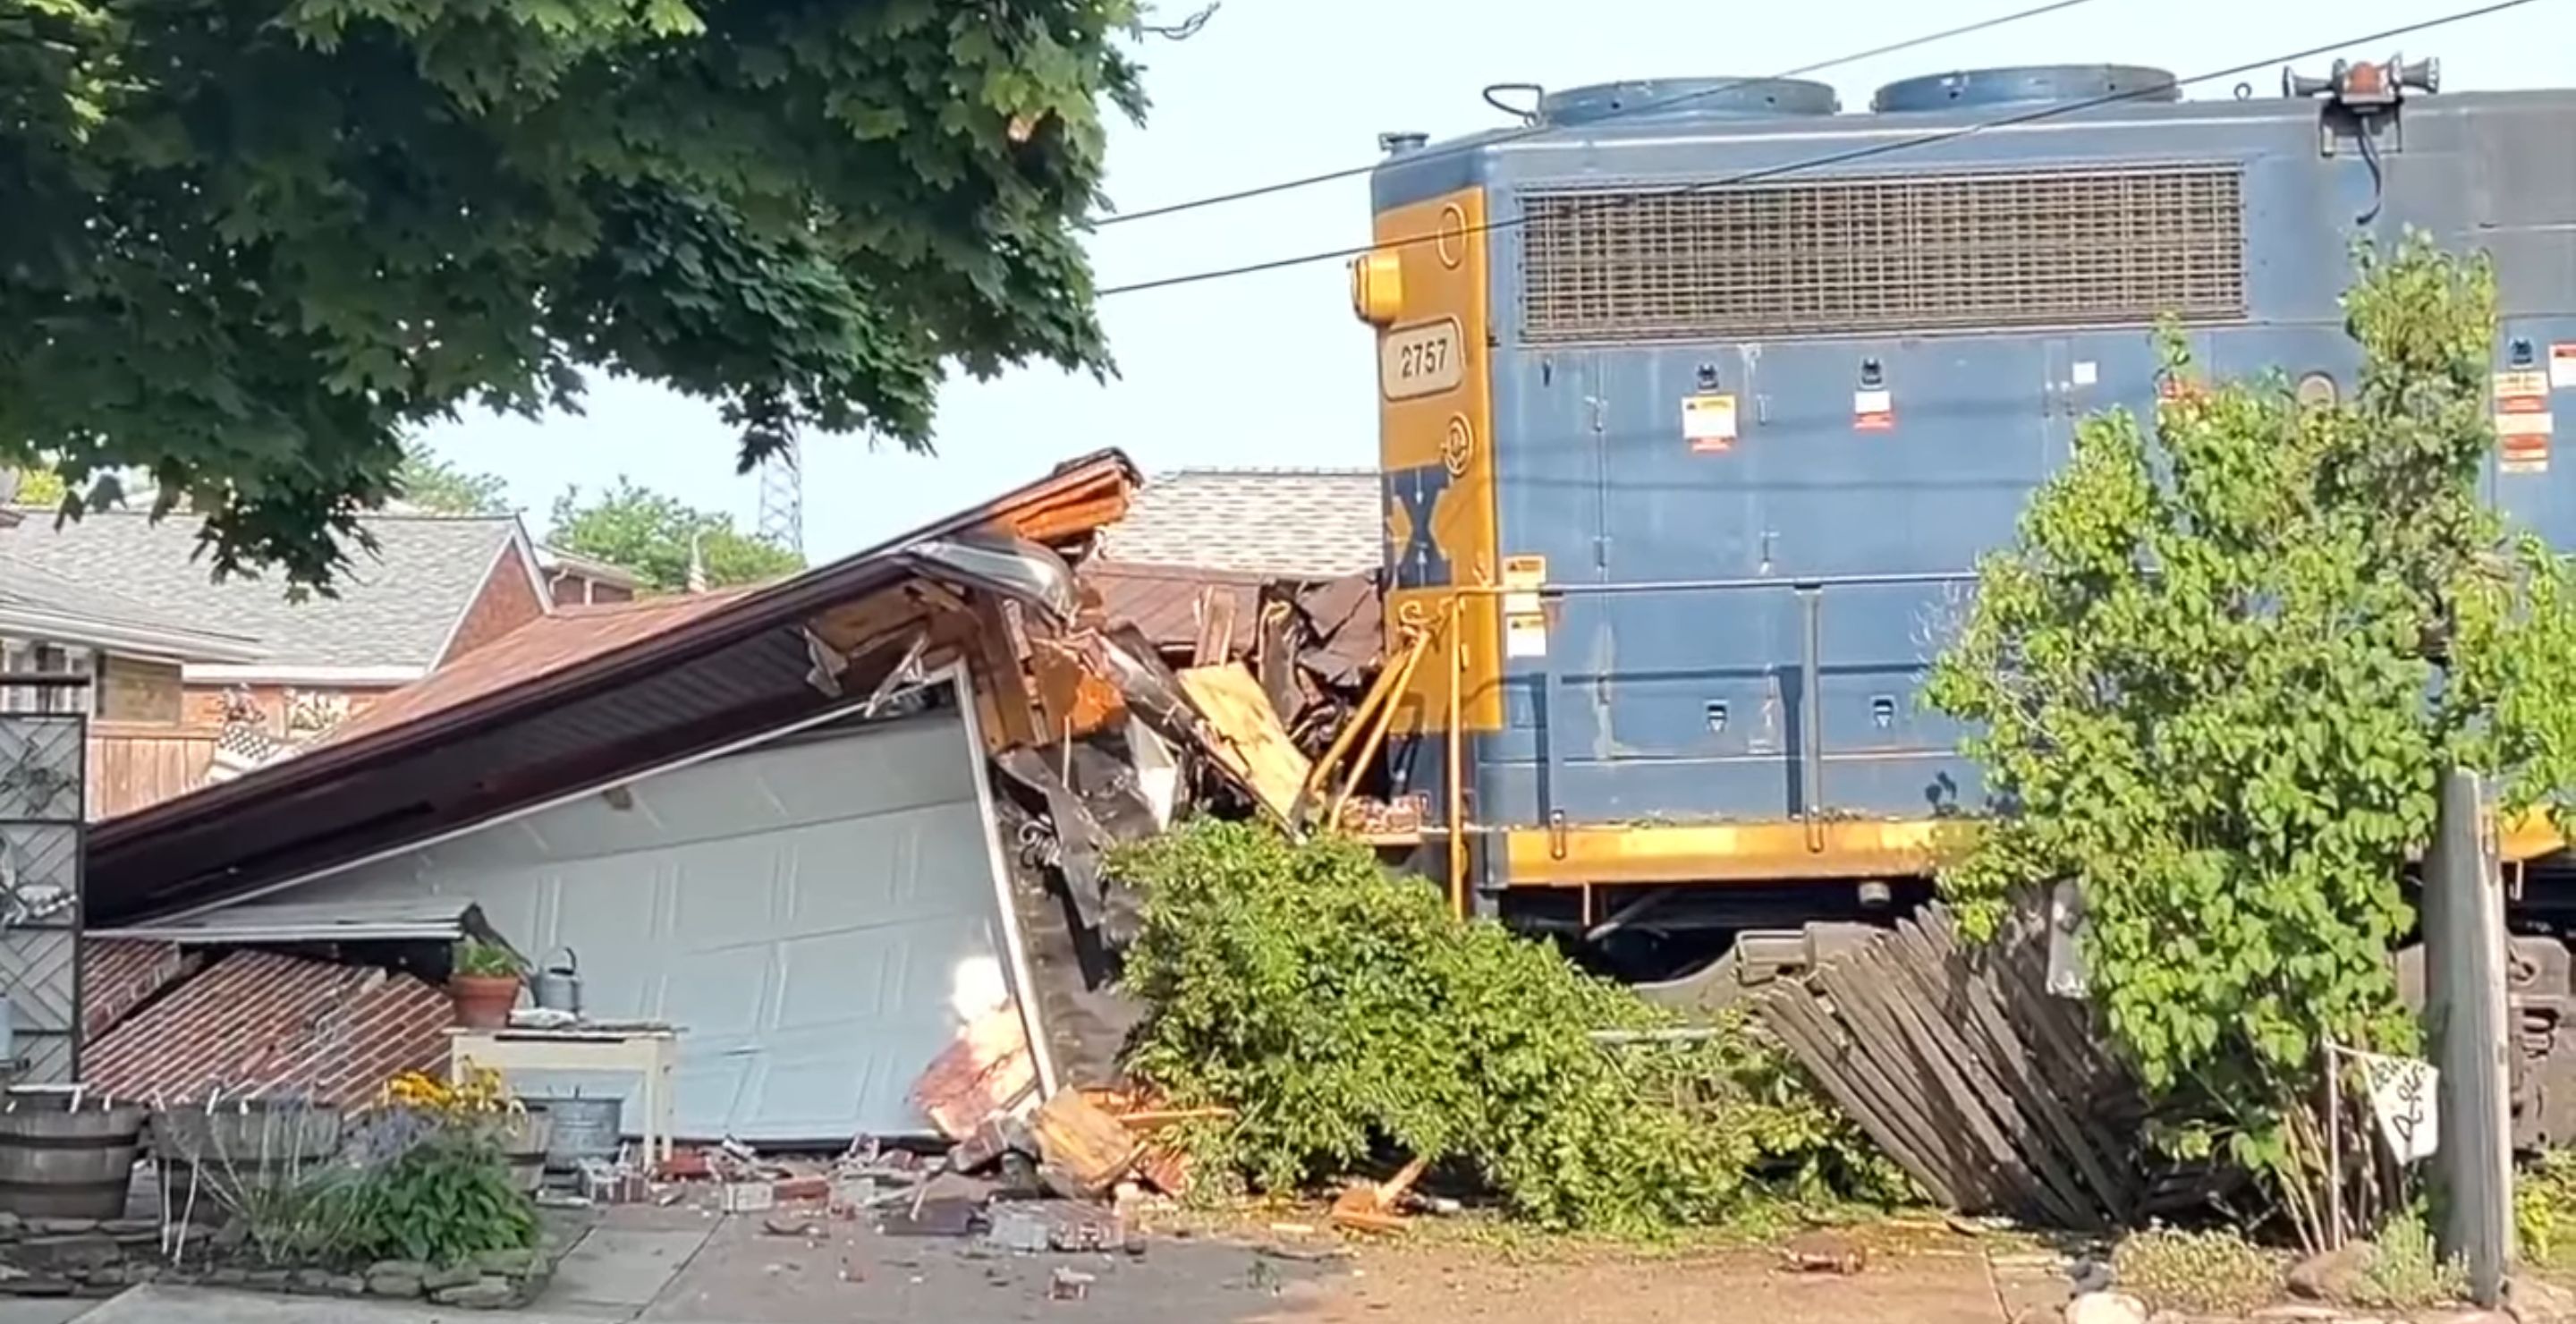 Video Shows Devastating Destruction After Train Derails And Crashes Into New York Home